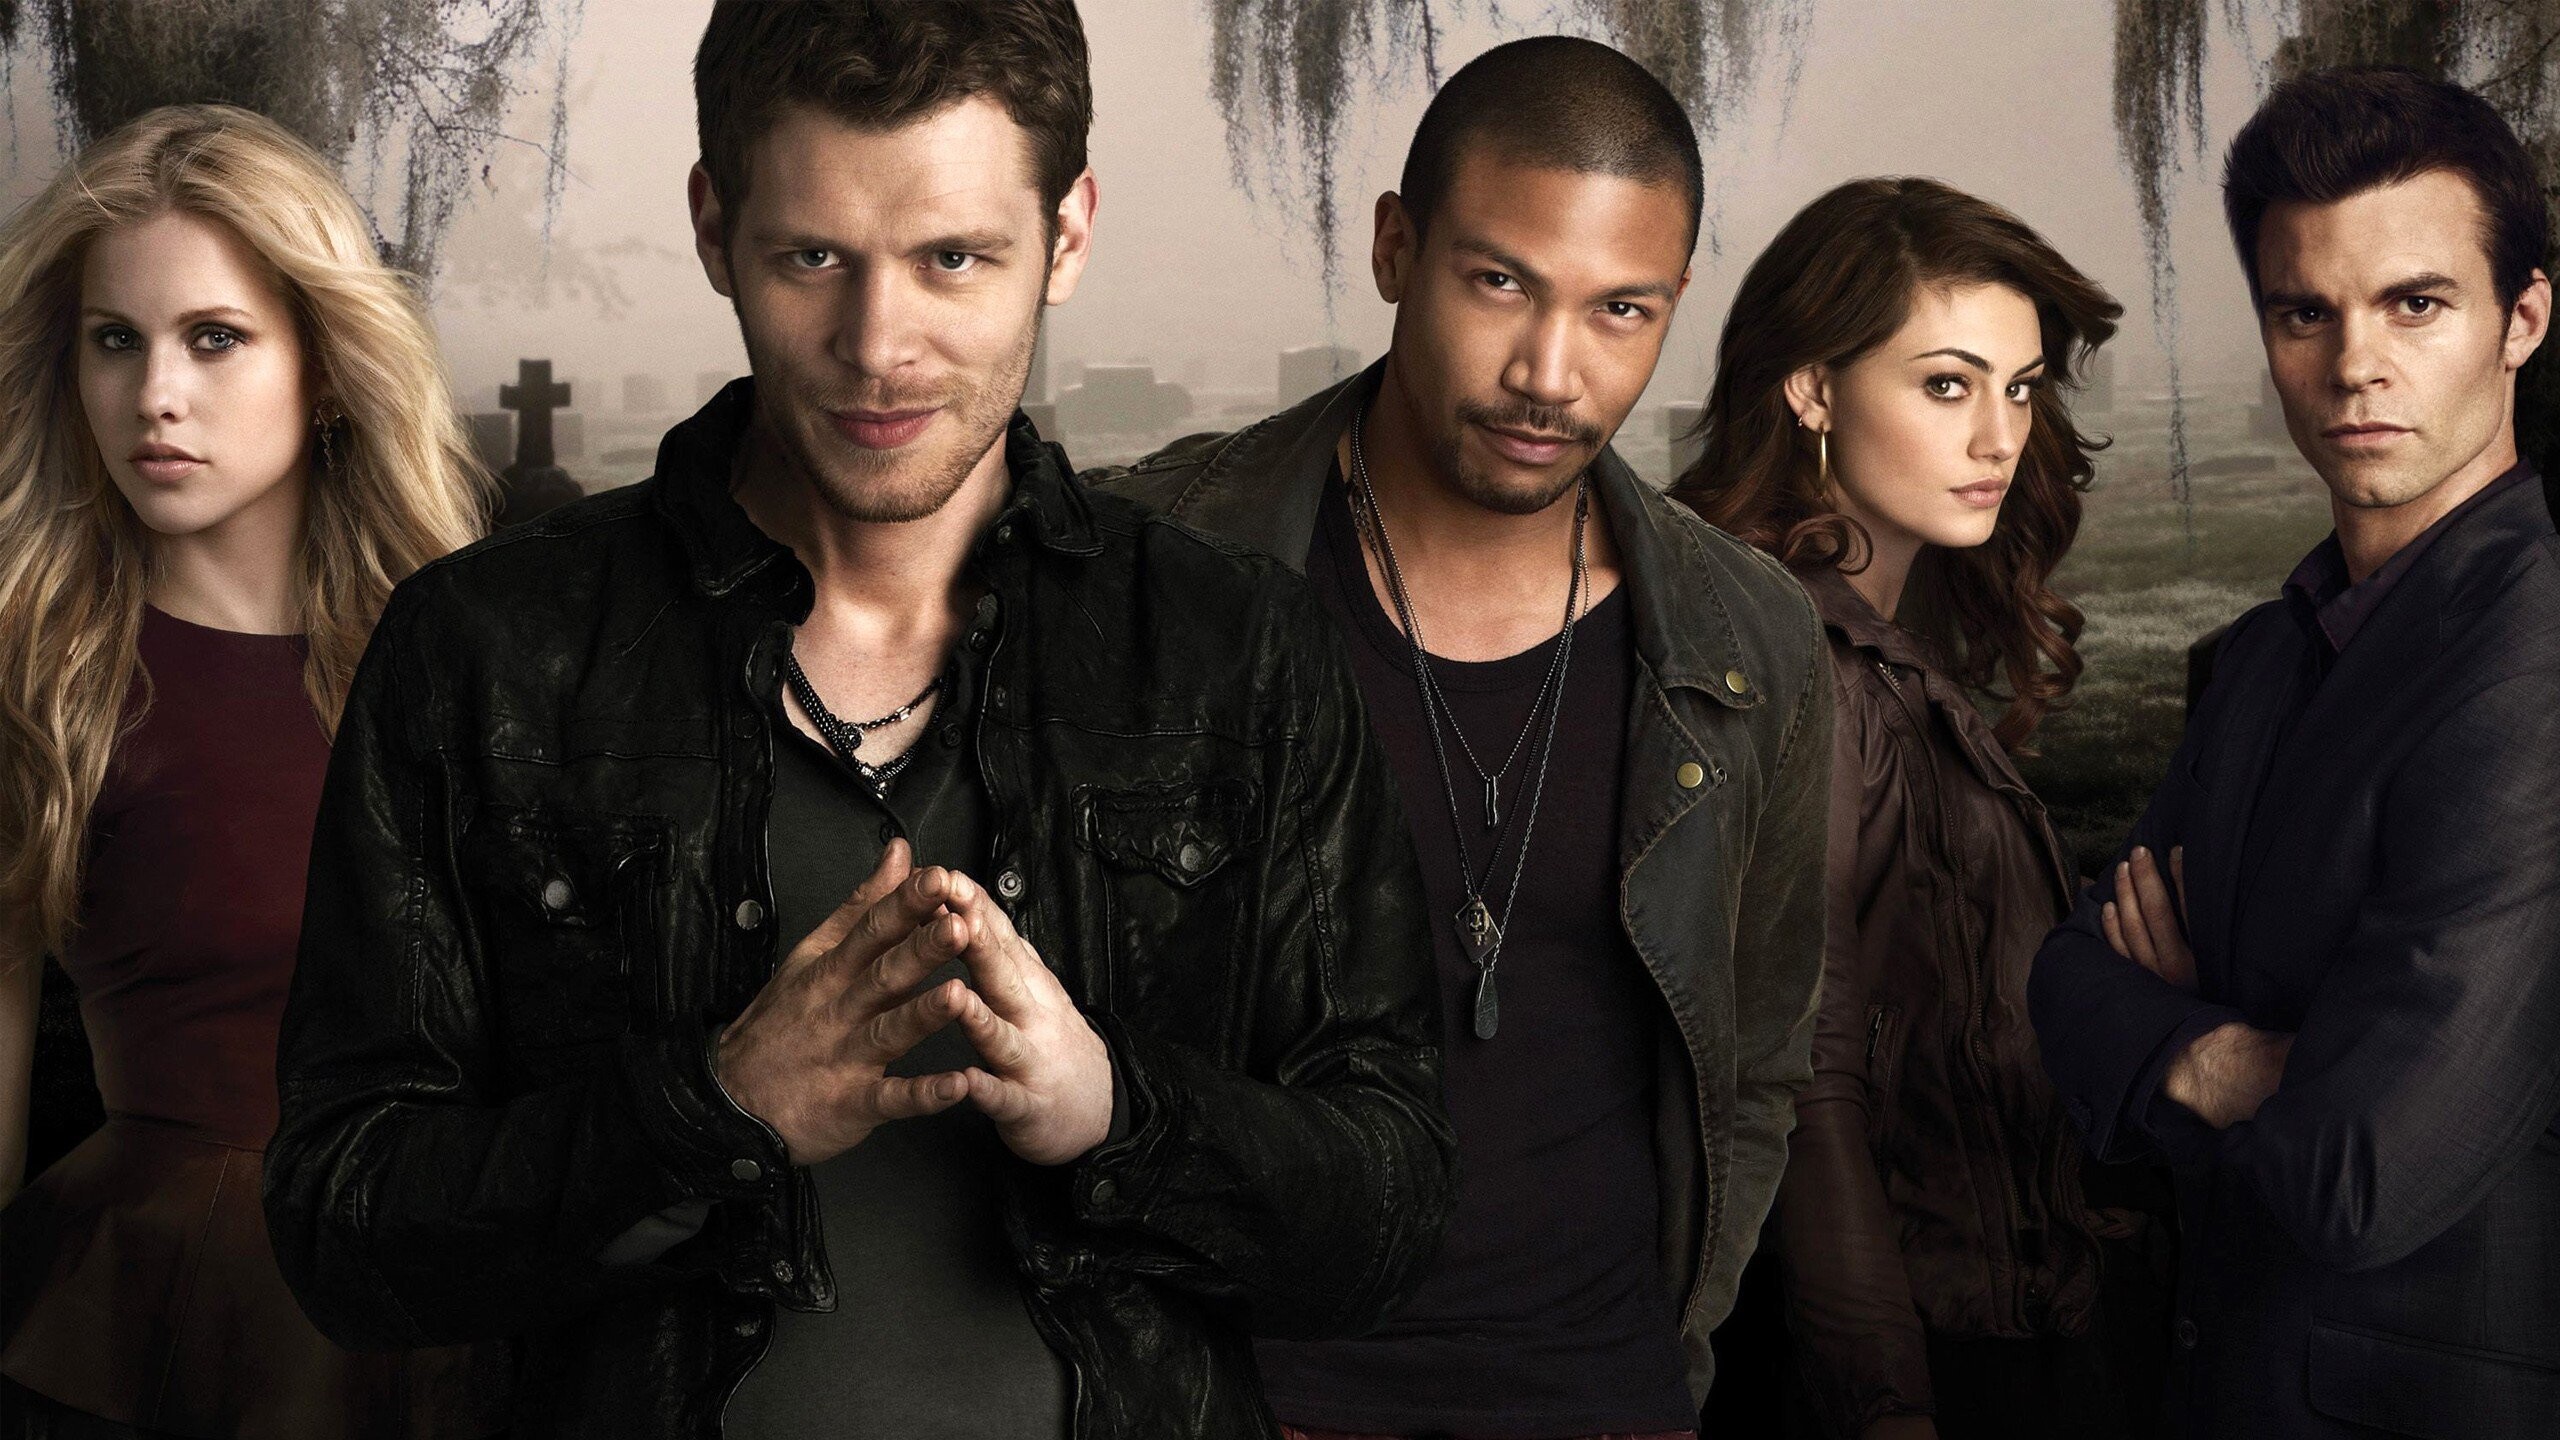 The Originals (TV Series): Fantasy drama which centers around the Mikaelson siblings, A family of vampires. 2560x1440 HD Background.